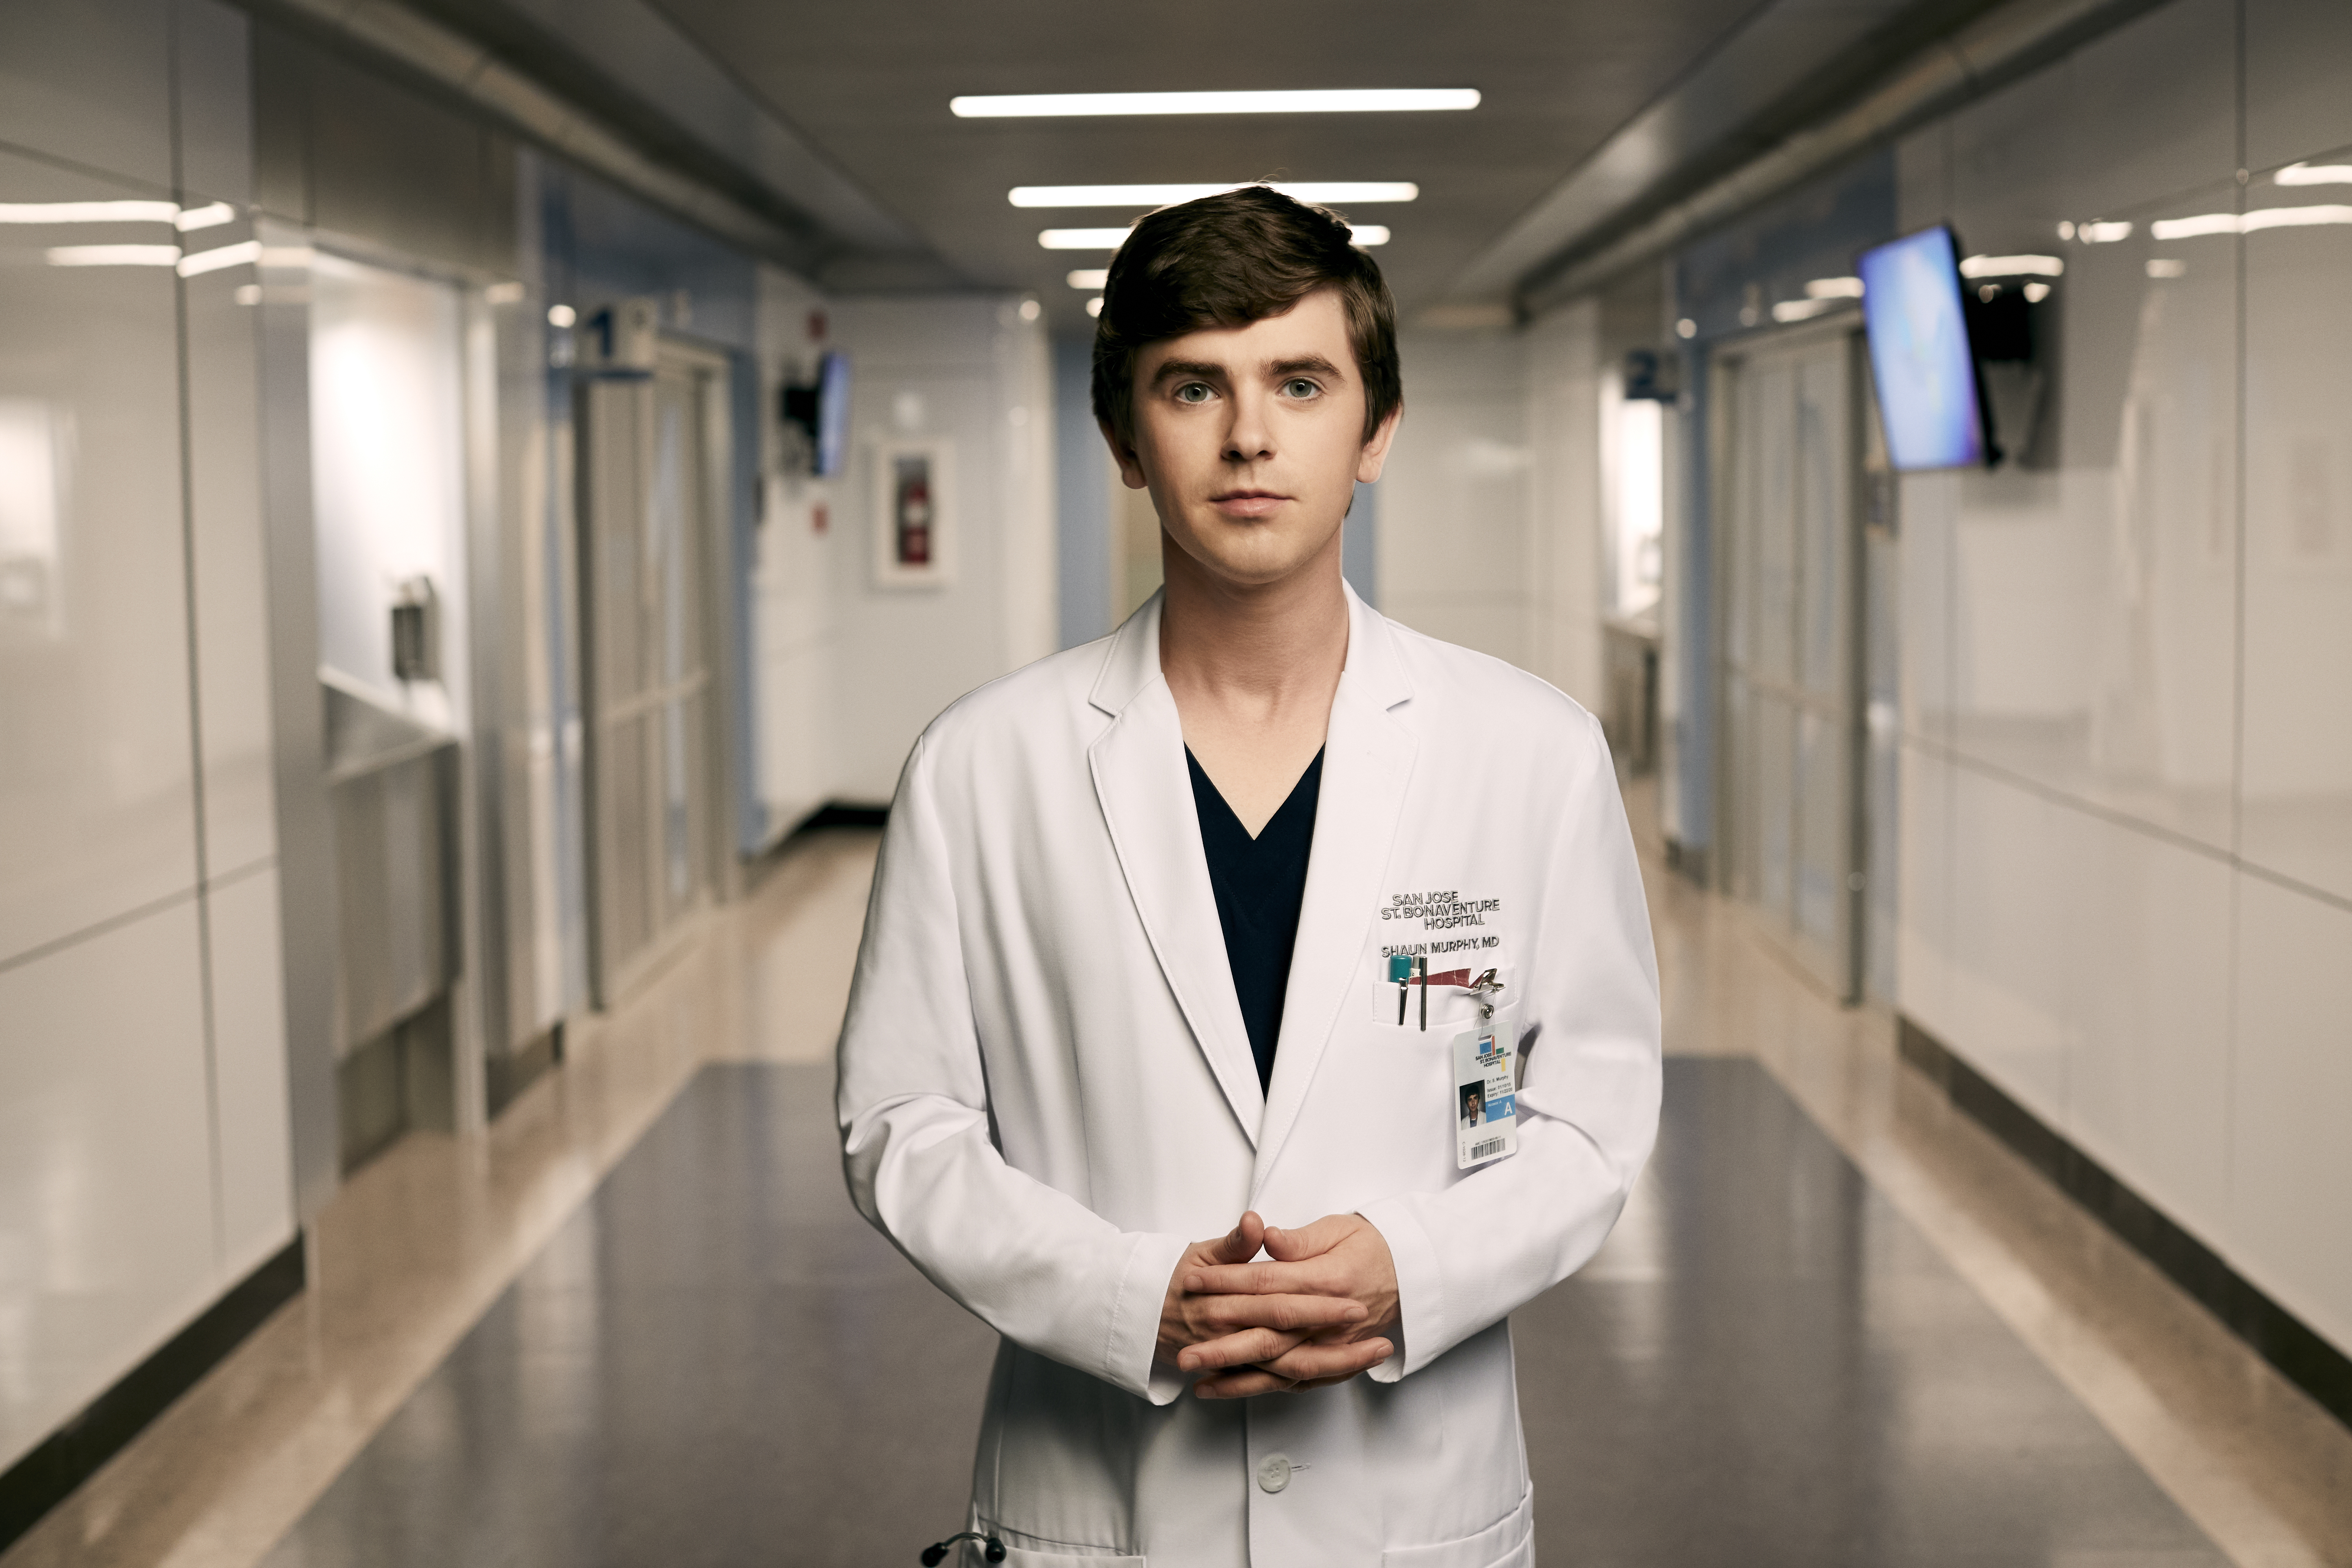 Best-bets for May 21: Good-bye to a good doctor